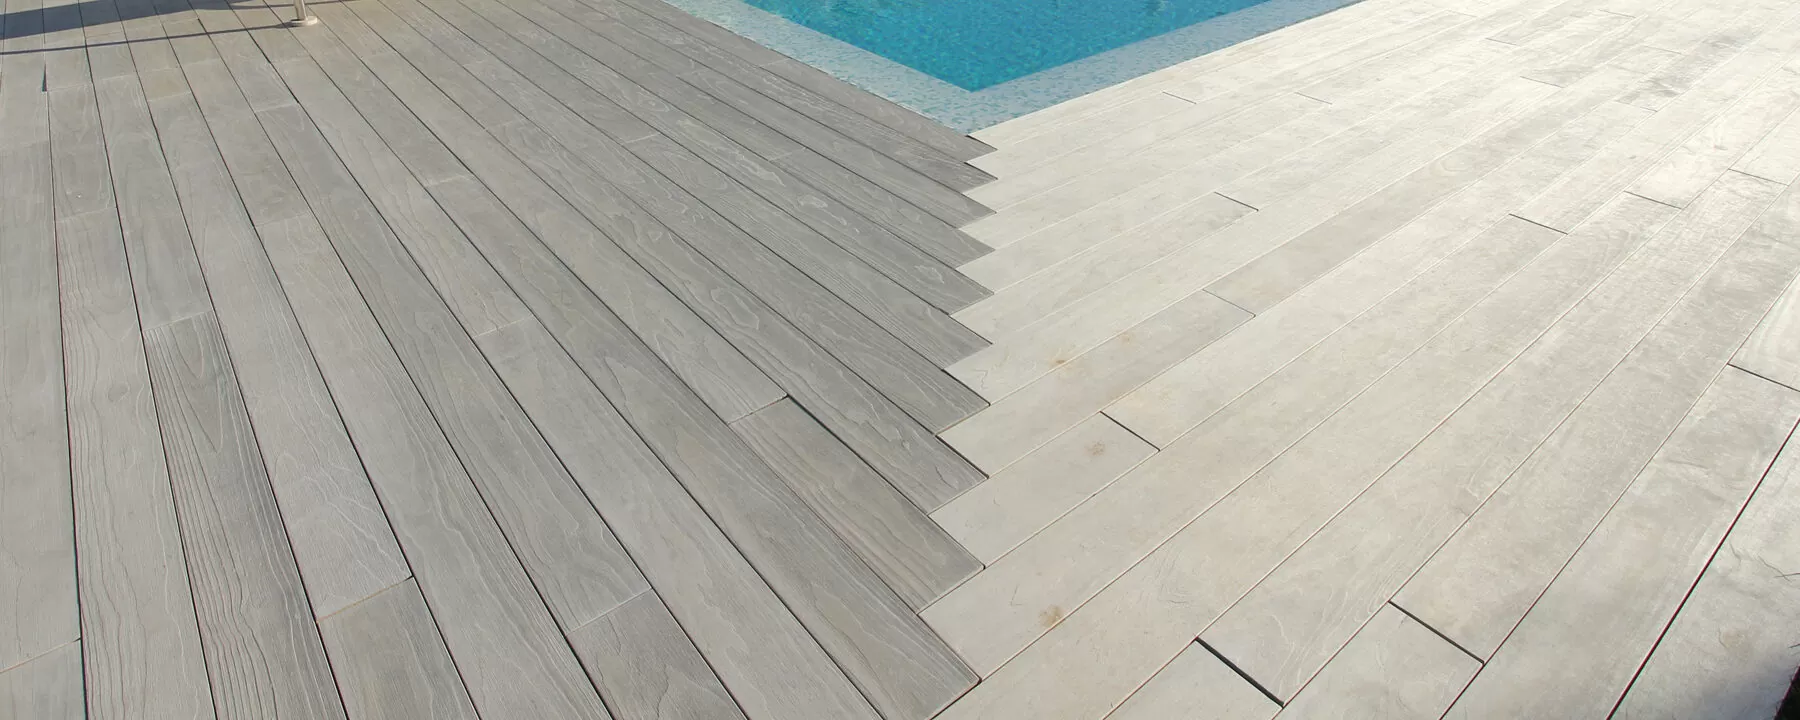 Poolside decking in Italy